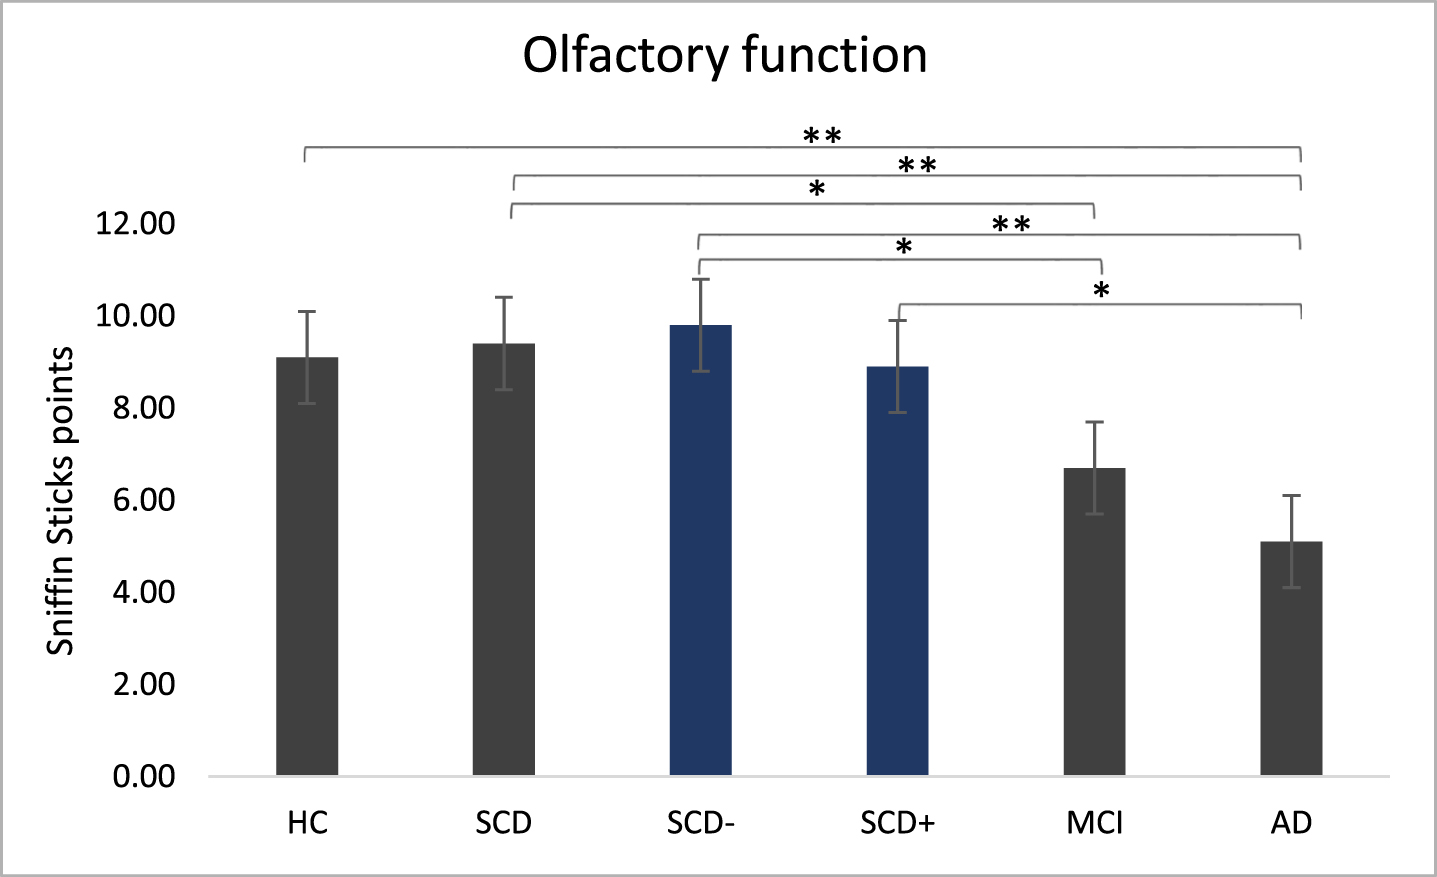 Olfactory function. Sniffin’ Sticks performance in main groups and subgroups measured with Sniffin’ sticks test. Kruskal-Wallis were run separately for main group analysis (HC, SCD, MCI, AD) and for sub group analysis (SCD–, SCD+ added).  **p < 0.001,  *p < 0.05.